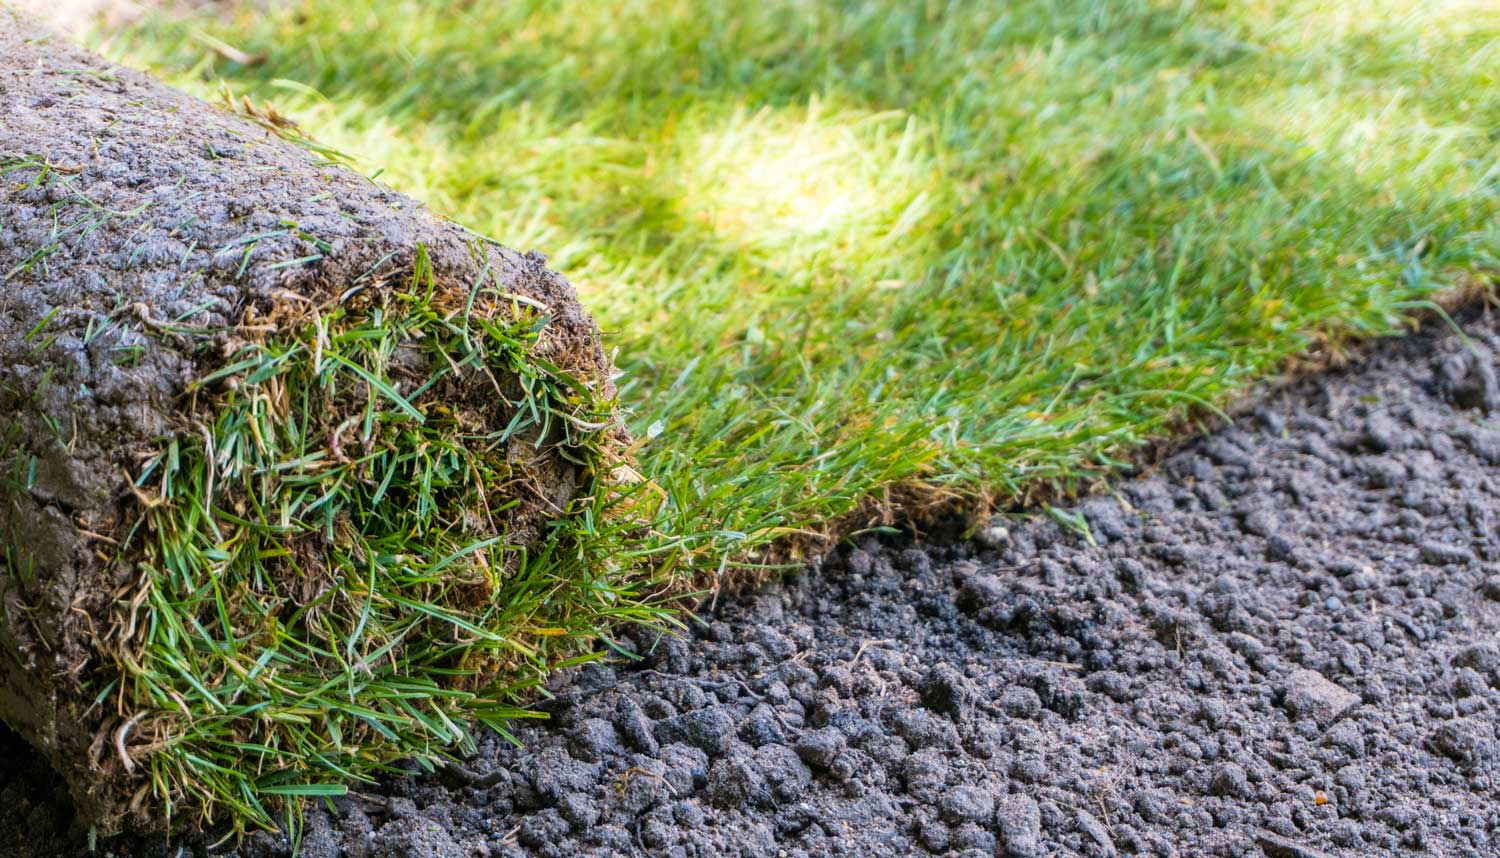 How Much Does Sod Cost? 2019 Cost Guide